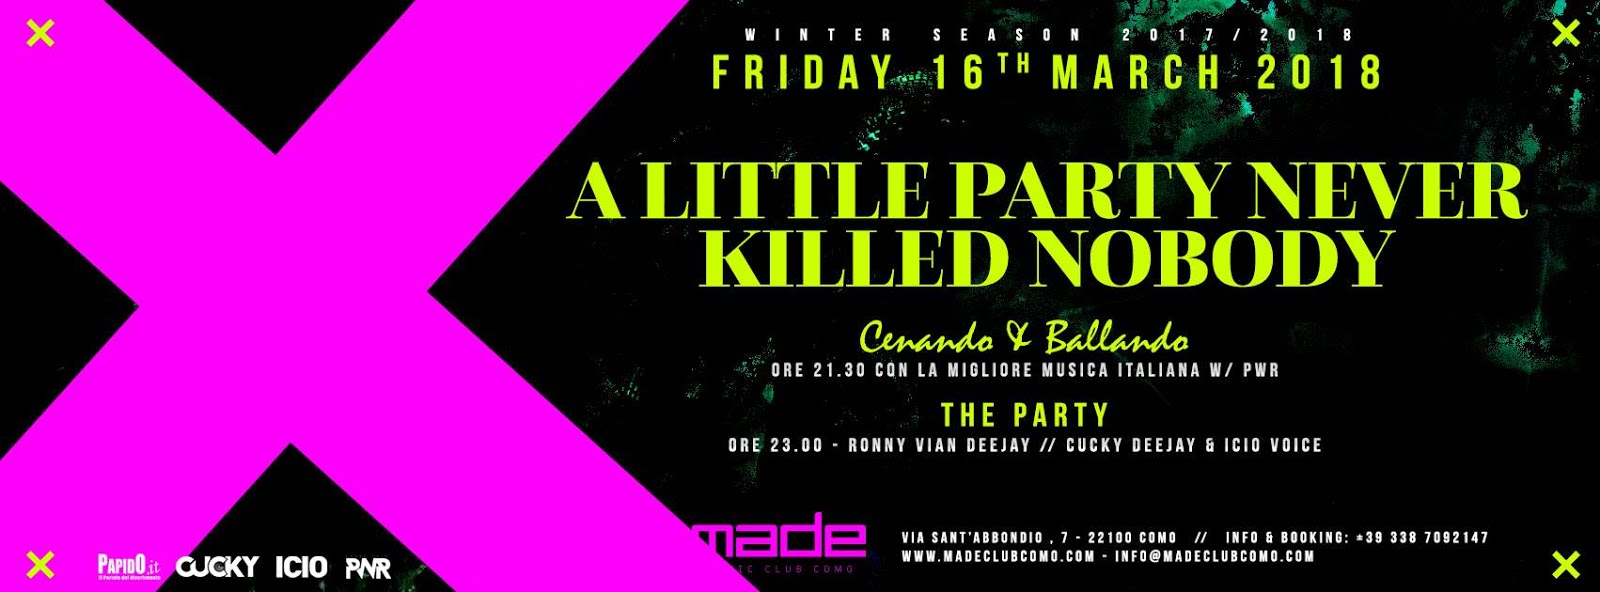 Made Club Como: A little party never killed nobody e XXL, hiphop finest in Formentera